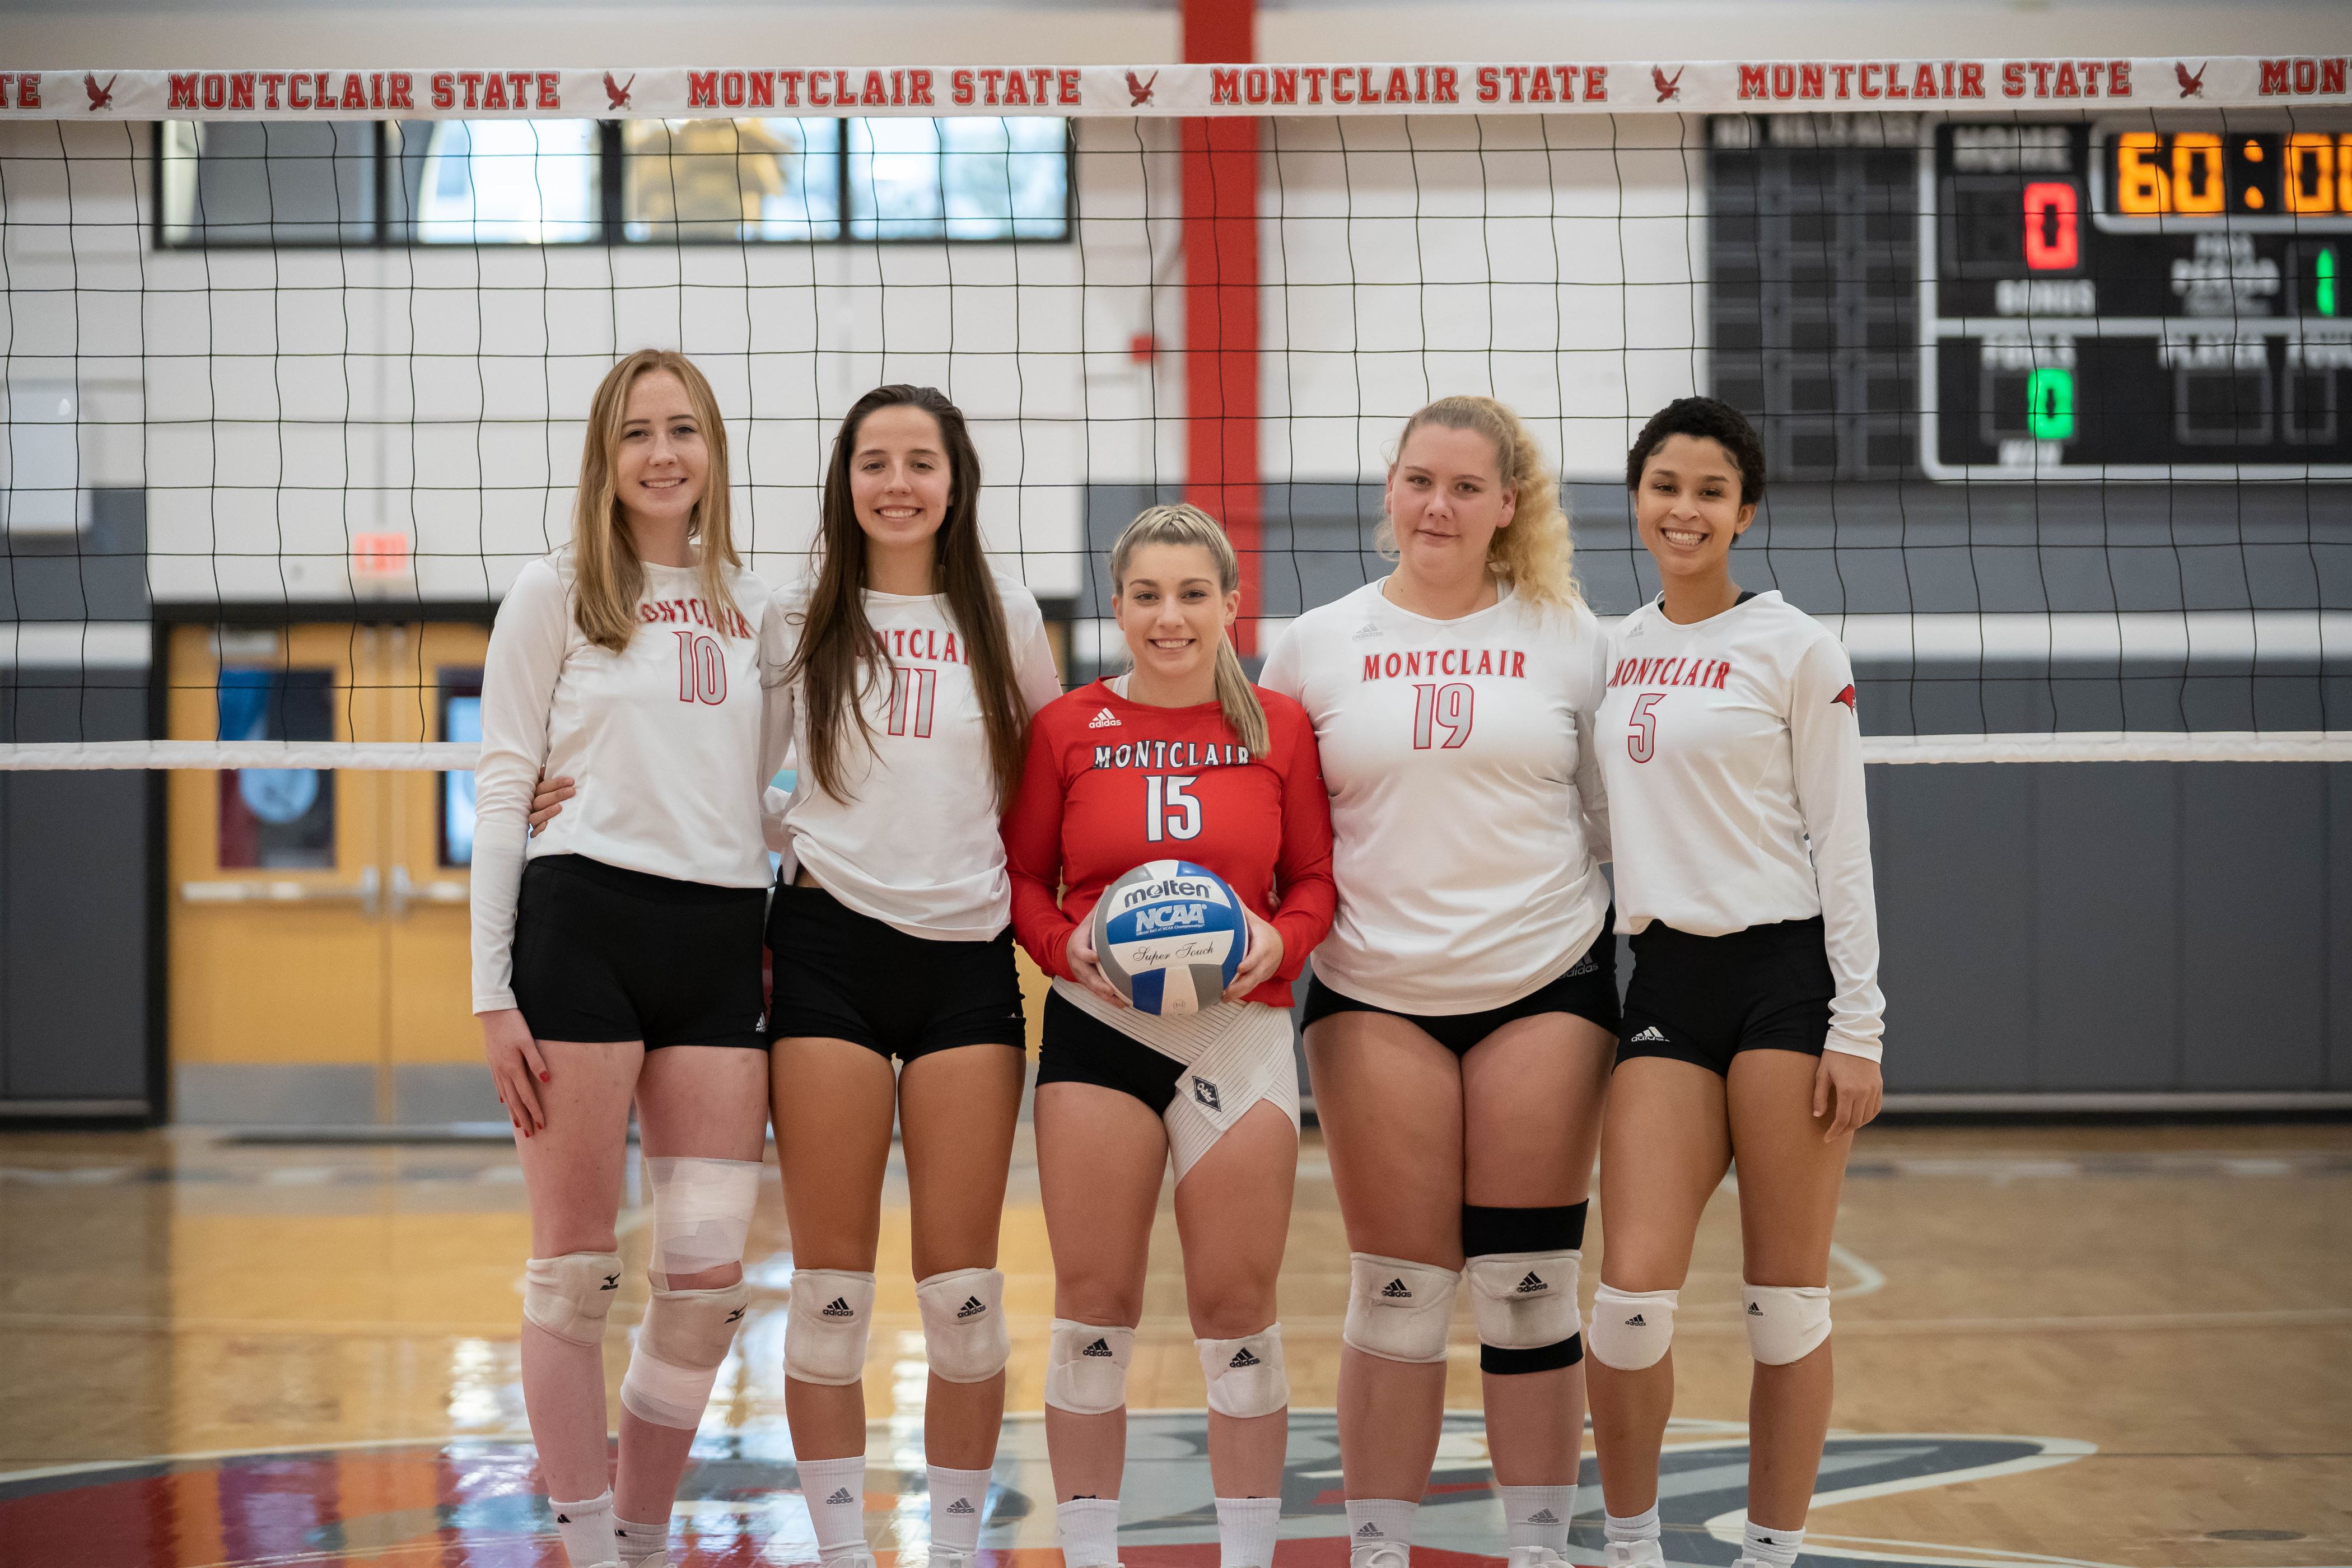 Left to right: Graduating this year are seniors Outside hitter Leah Higgins, setter/right side Delaney St. Pierre, libero/defensive specialist Katelyn Monaghan, outside hitter Carly Waterman and right side Victoria Tennon. Photo courtesy of David Venezia